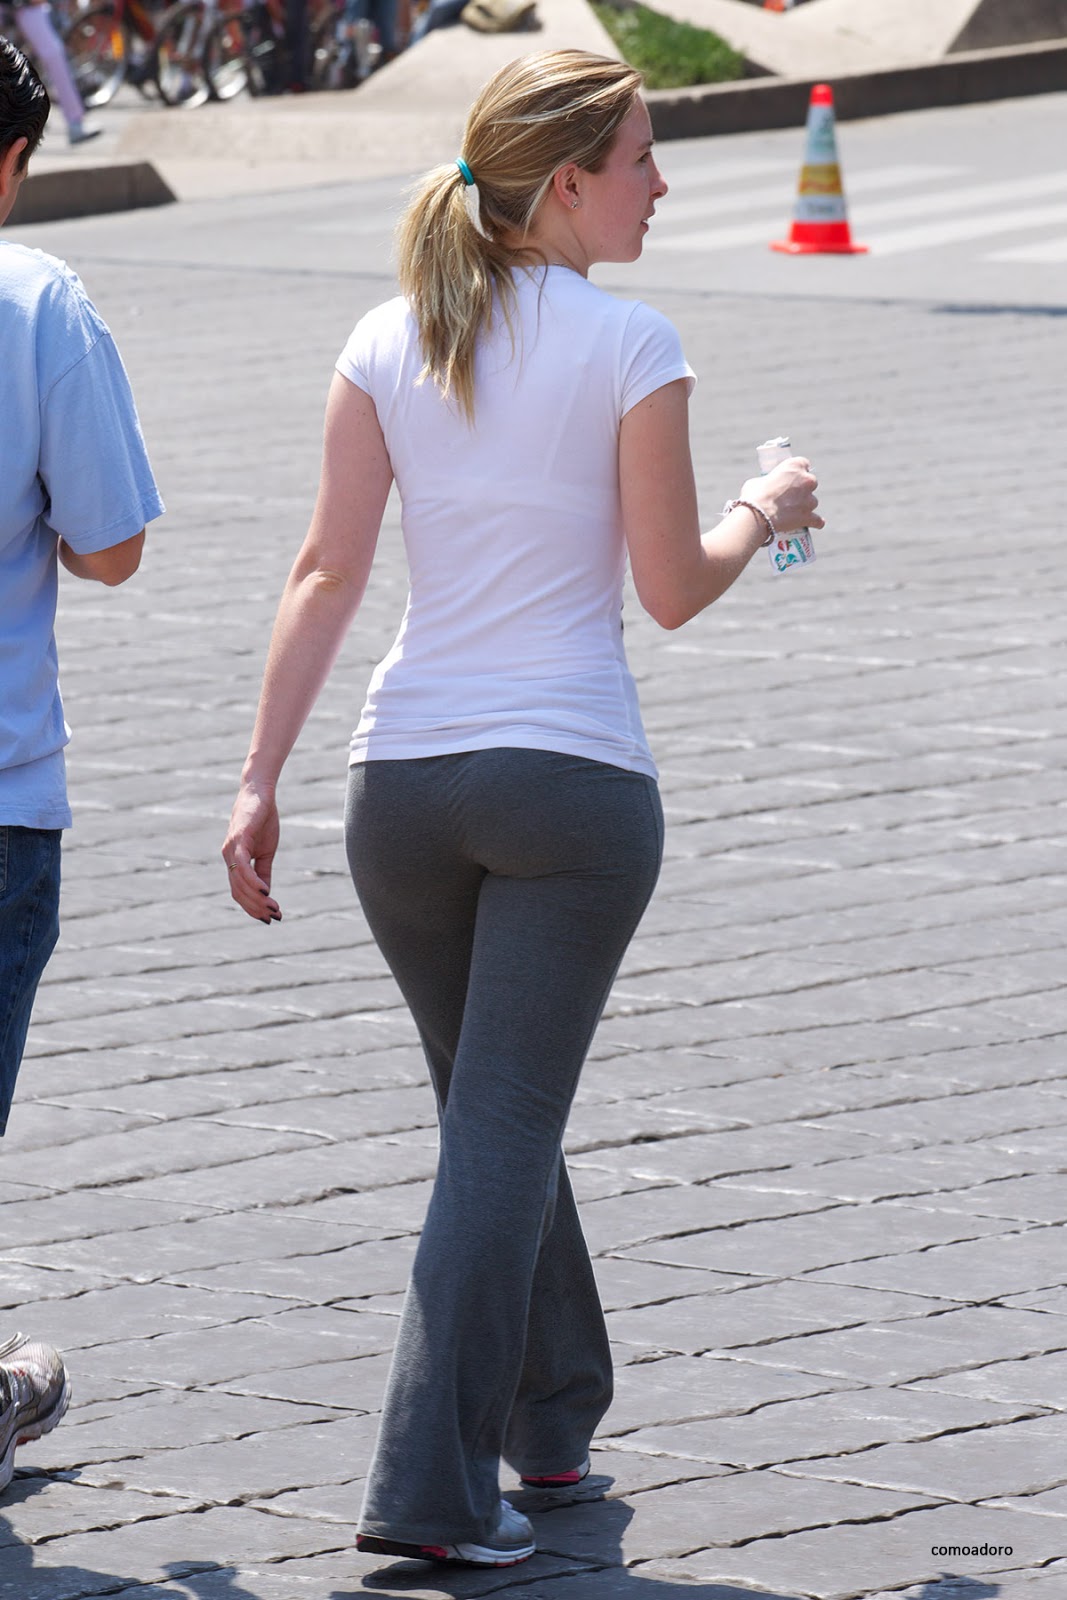 Round Ass Blond In Tight Lycra PAWG Divine